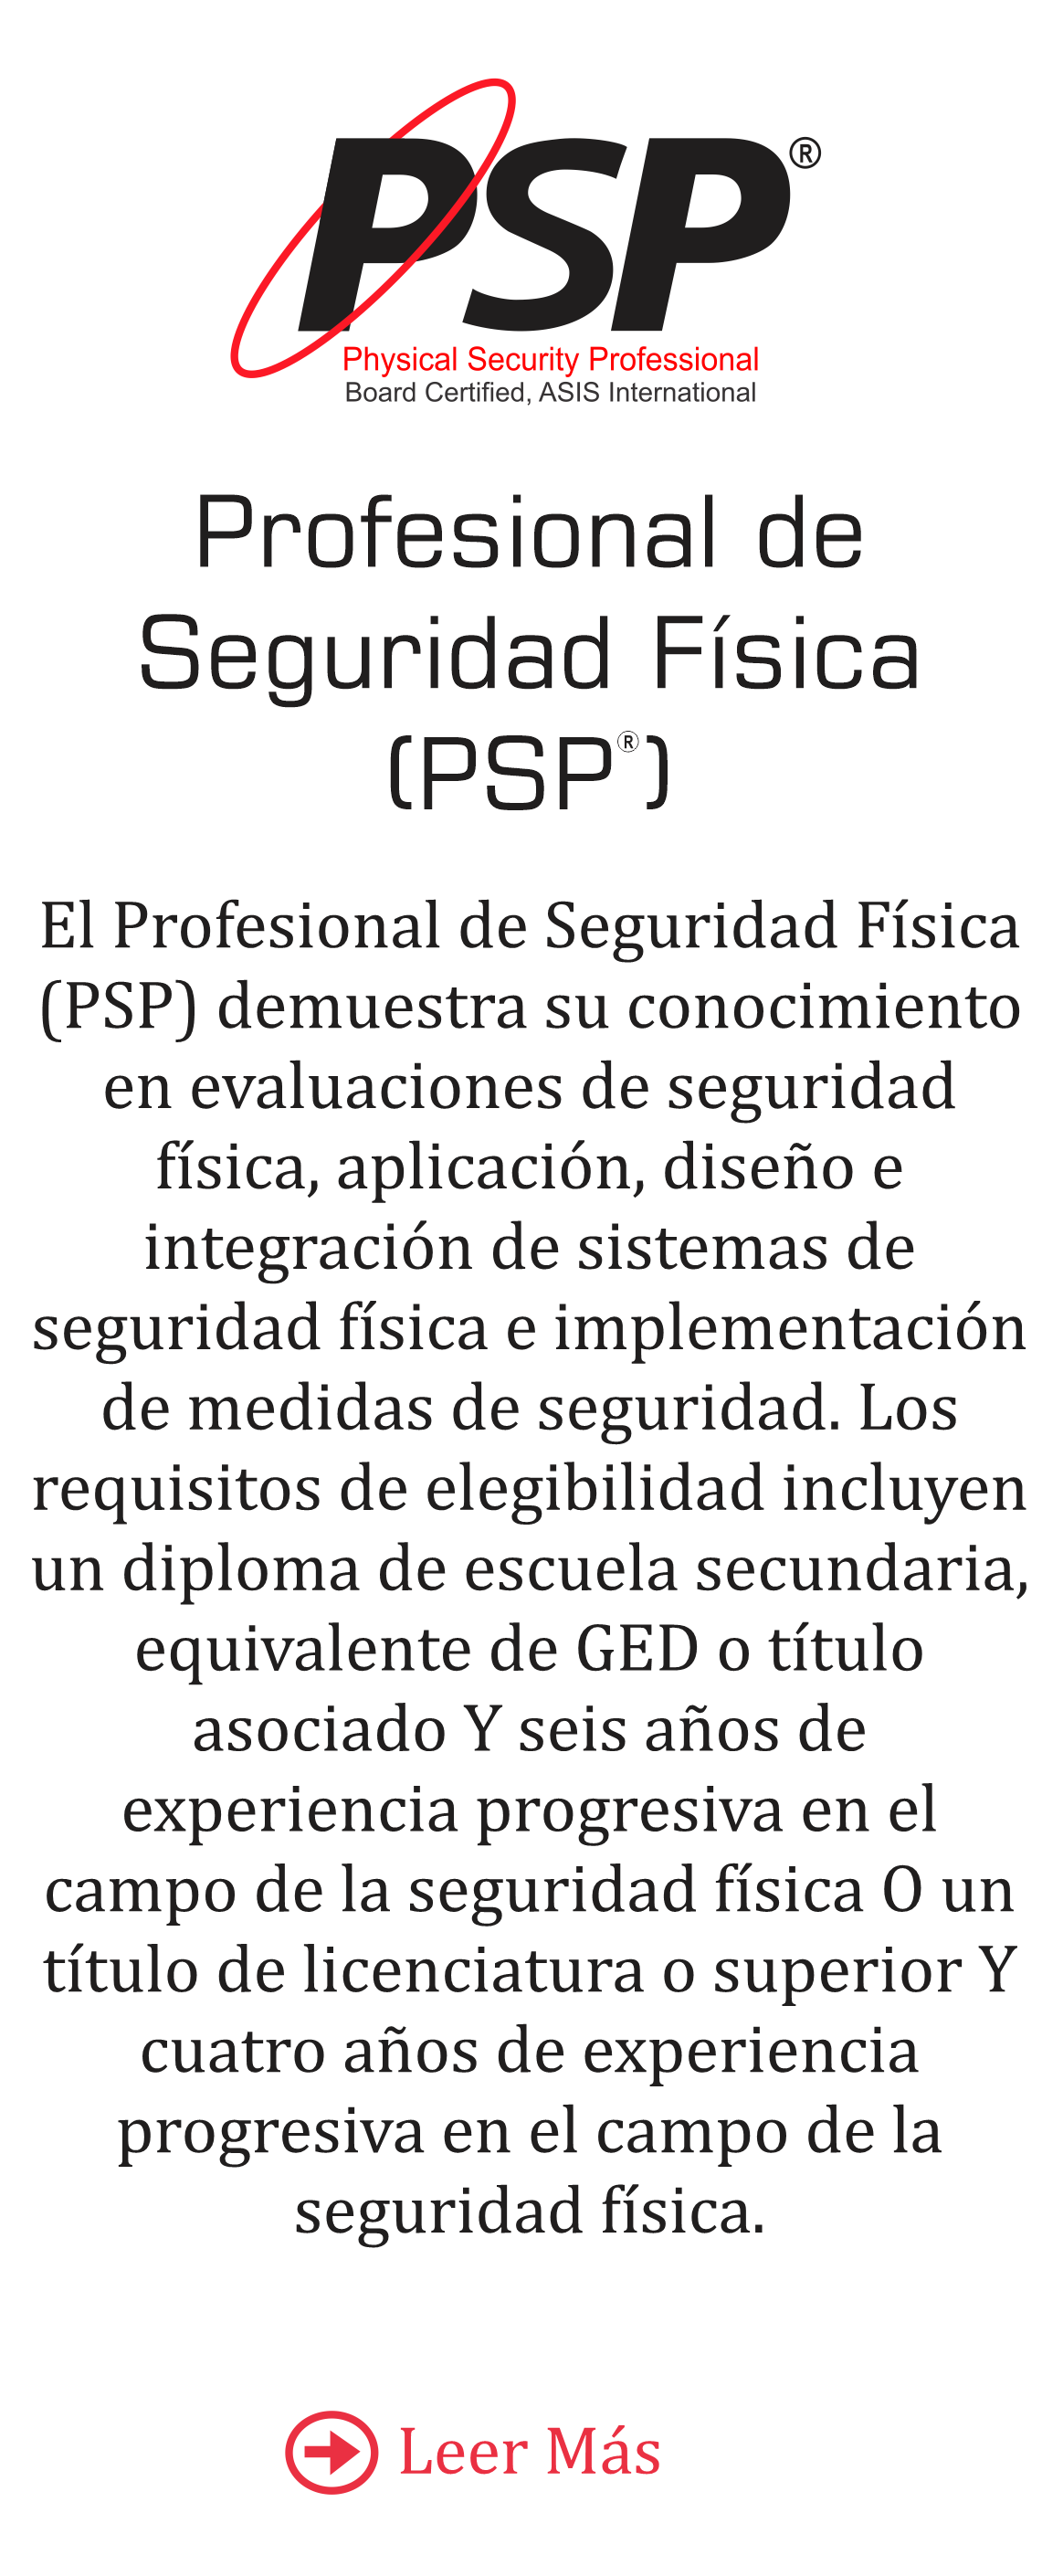 Physical Security Professional PSP